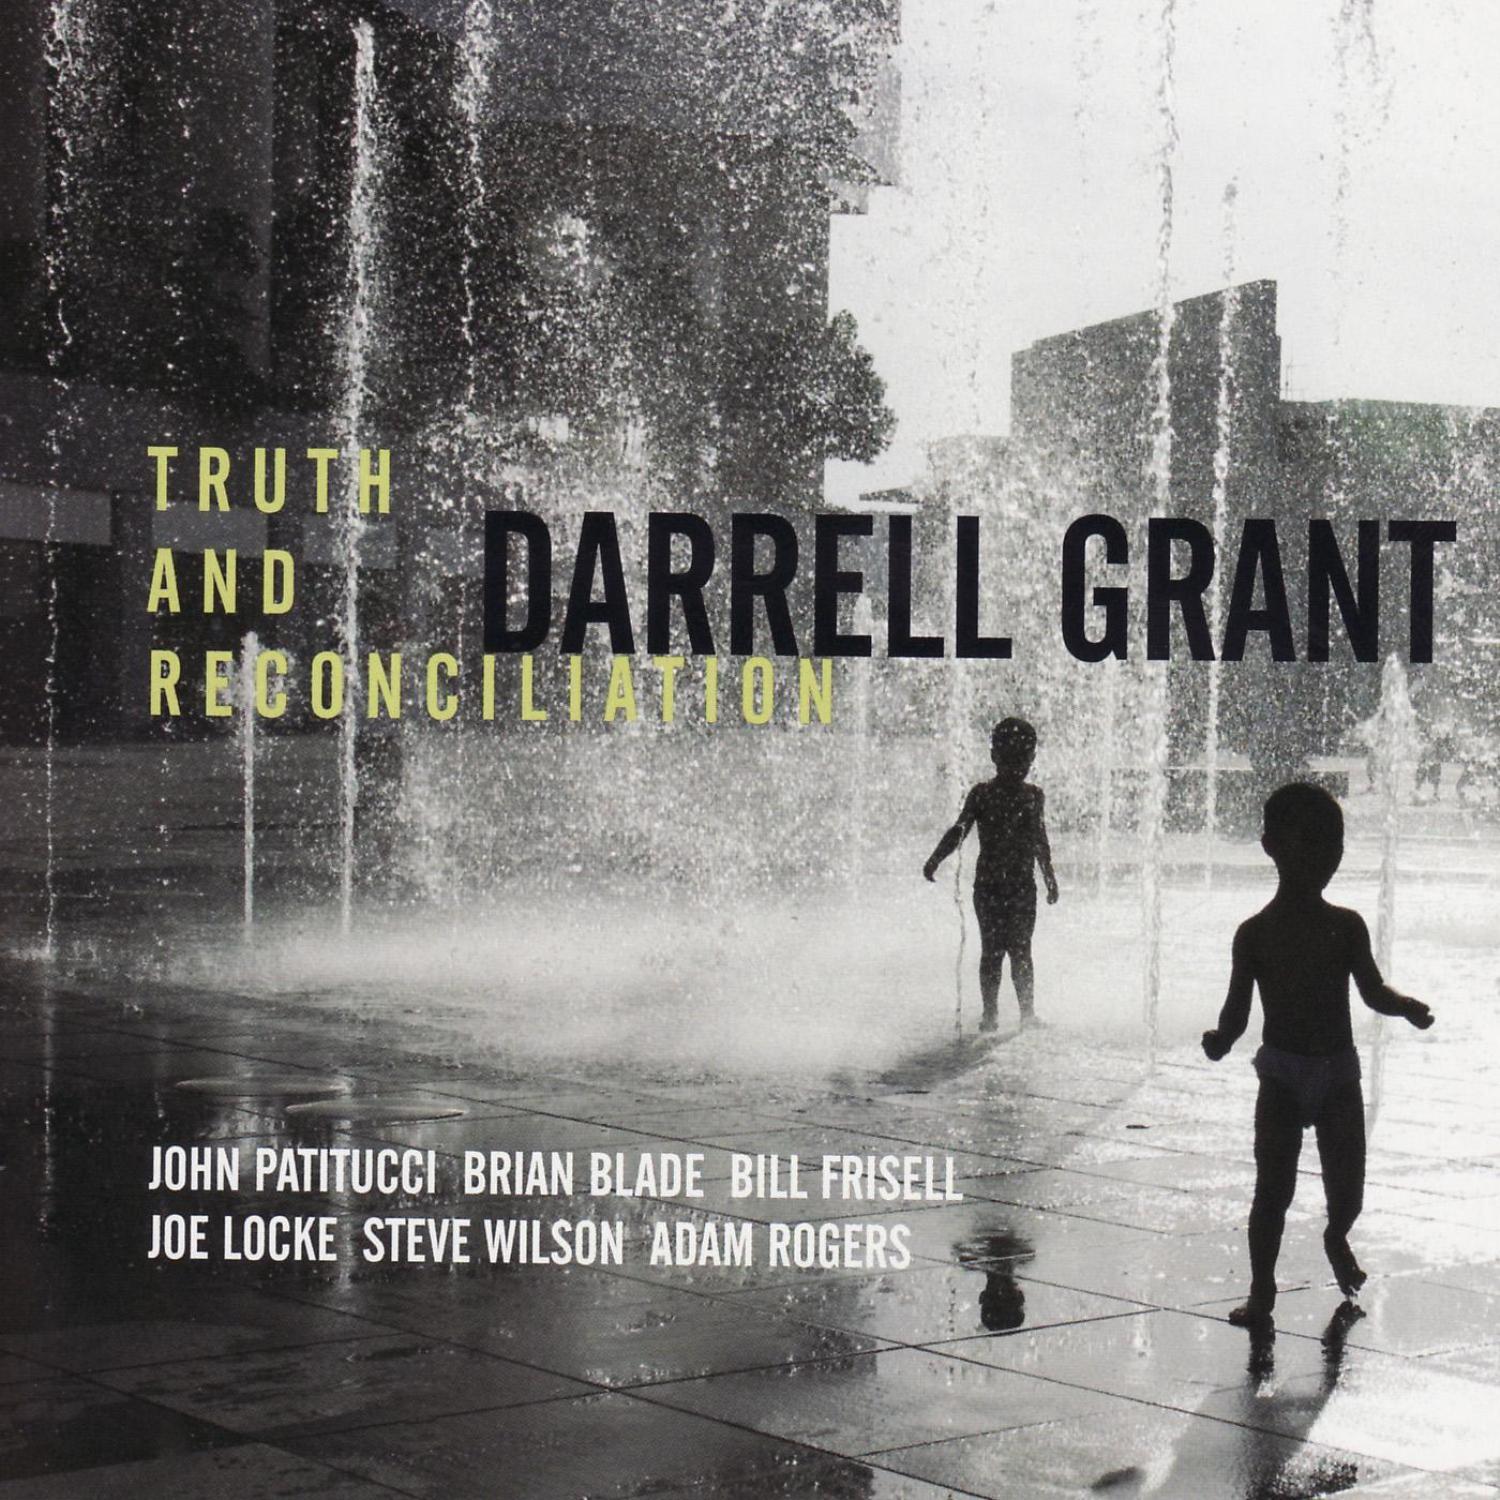 Darrell Grant - The Geography of Hope (I Am Music)